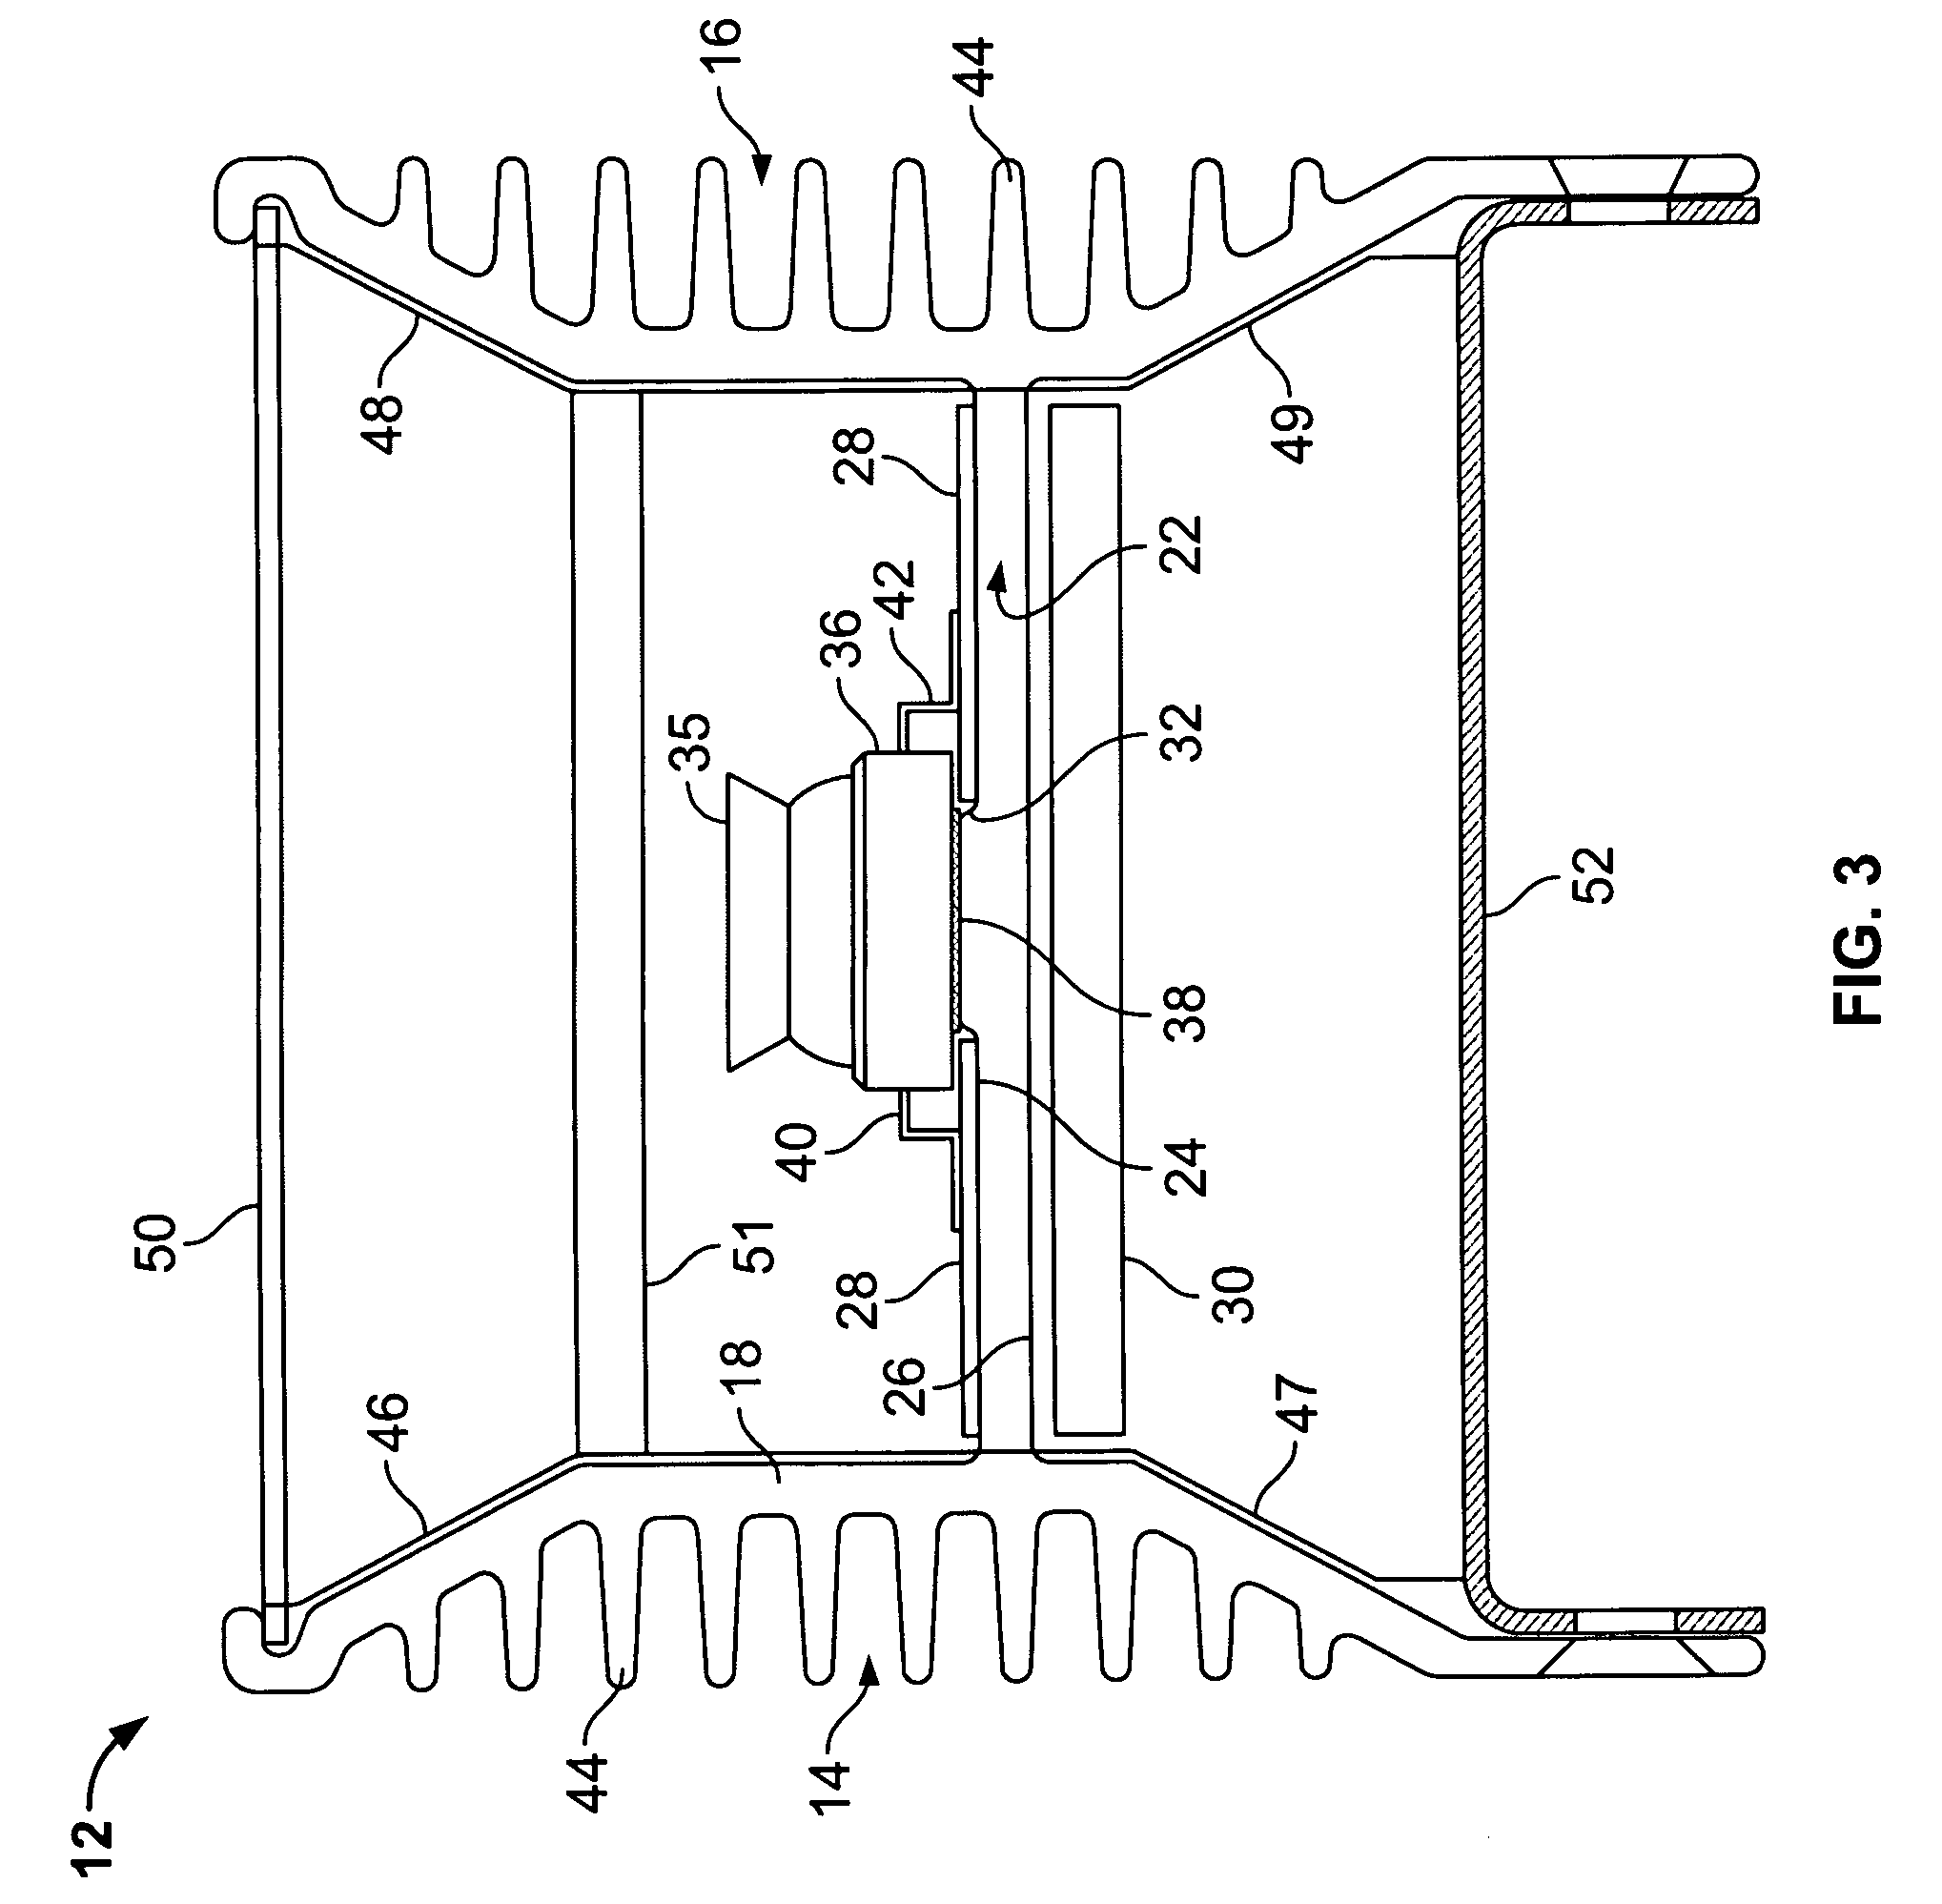 Light fixture for an LED-based aircraft lighting system